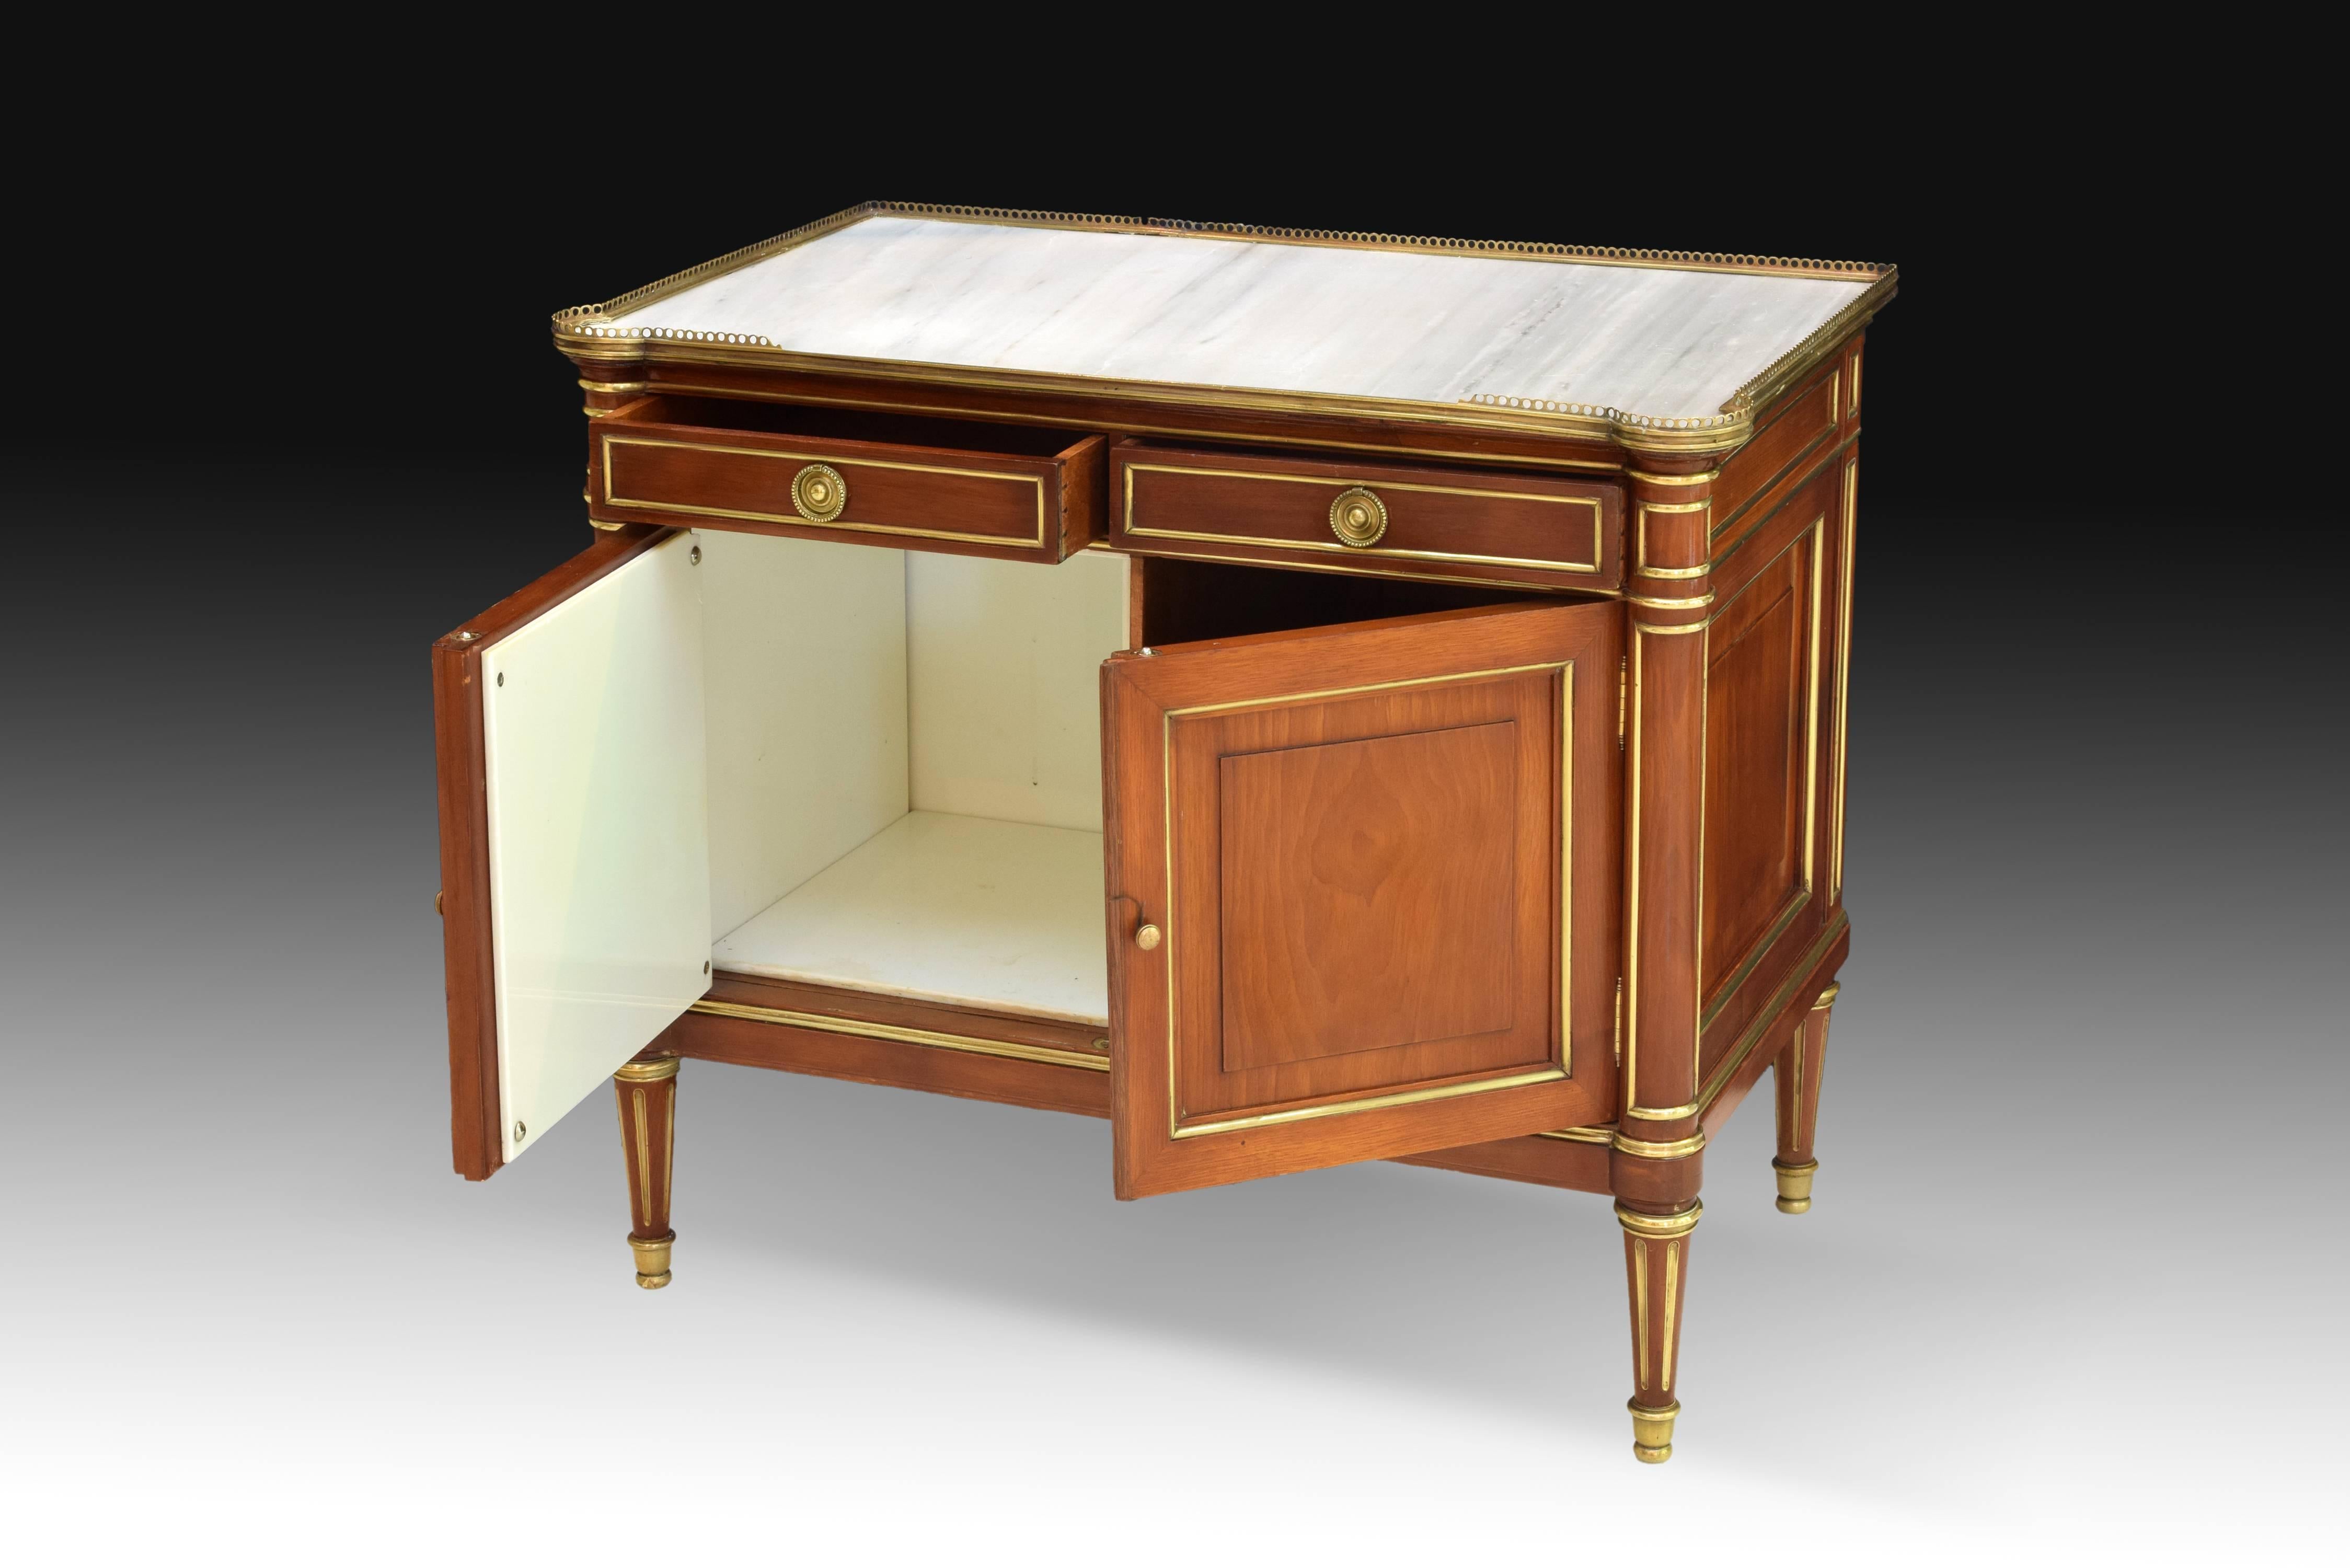 Nightstand shaped and decorated like an French Empire style commode. Raised on four legs in the shape of a ribbed column, it has two doors in the front and two drawers on them, as well as a white upper board enhanced with a Fine open railing. The